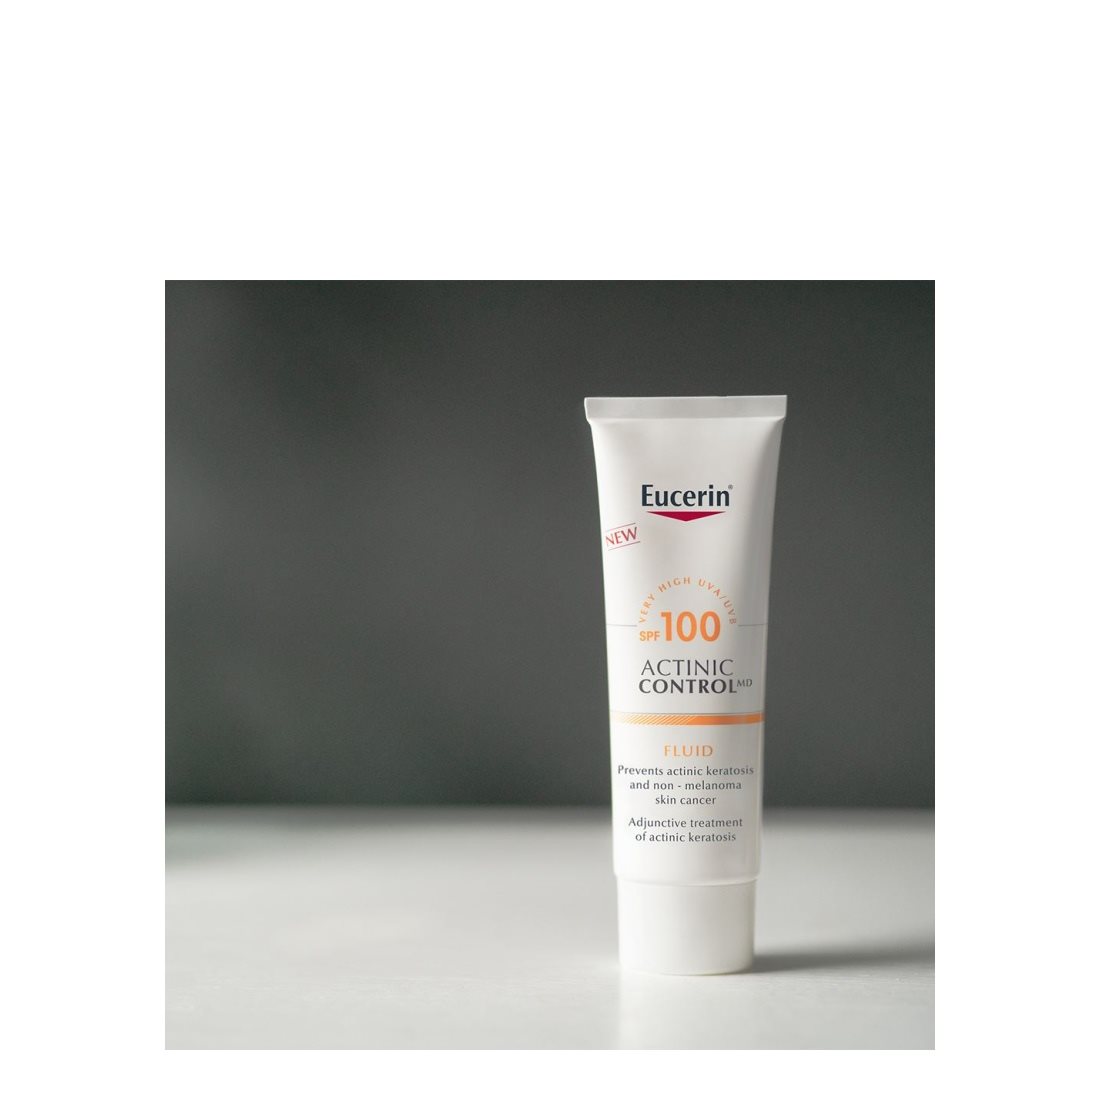 Actinic Control MD SPF 100 